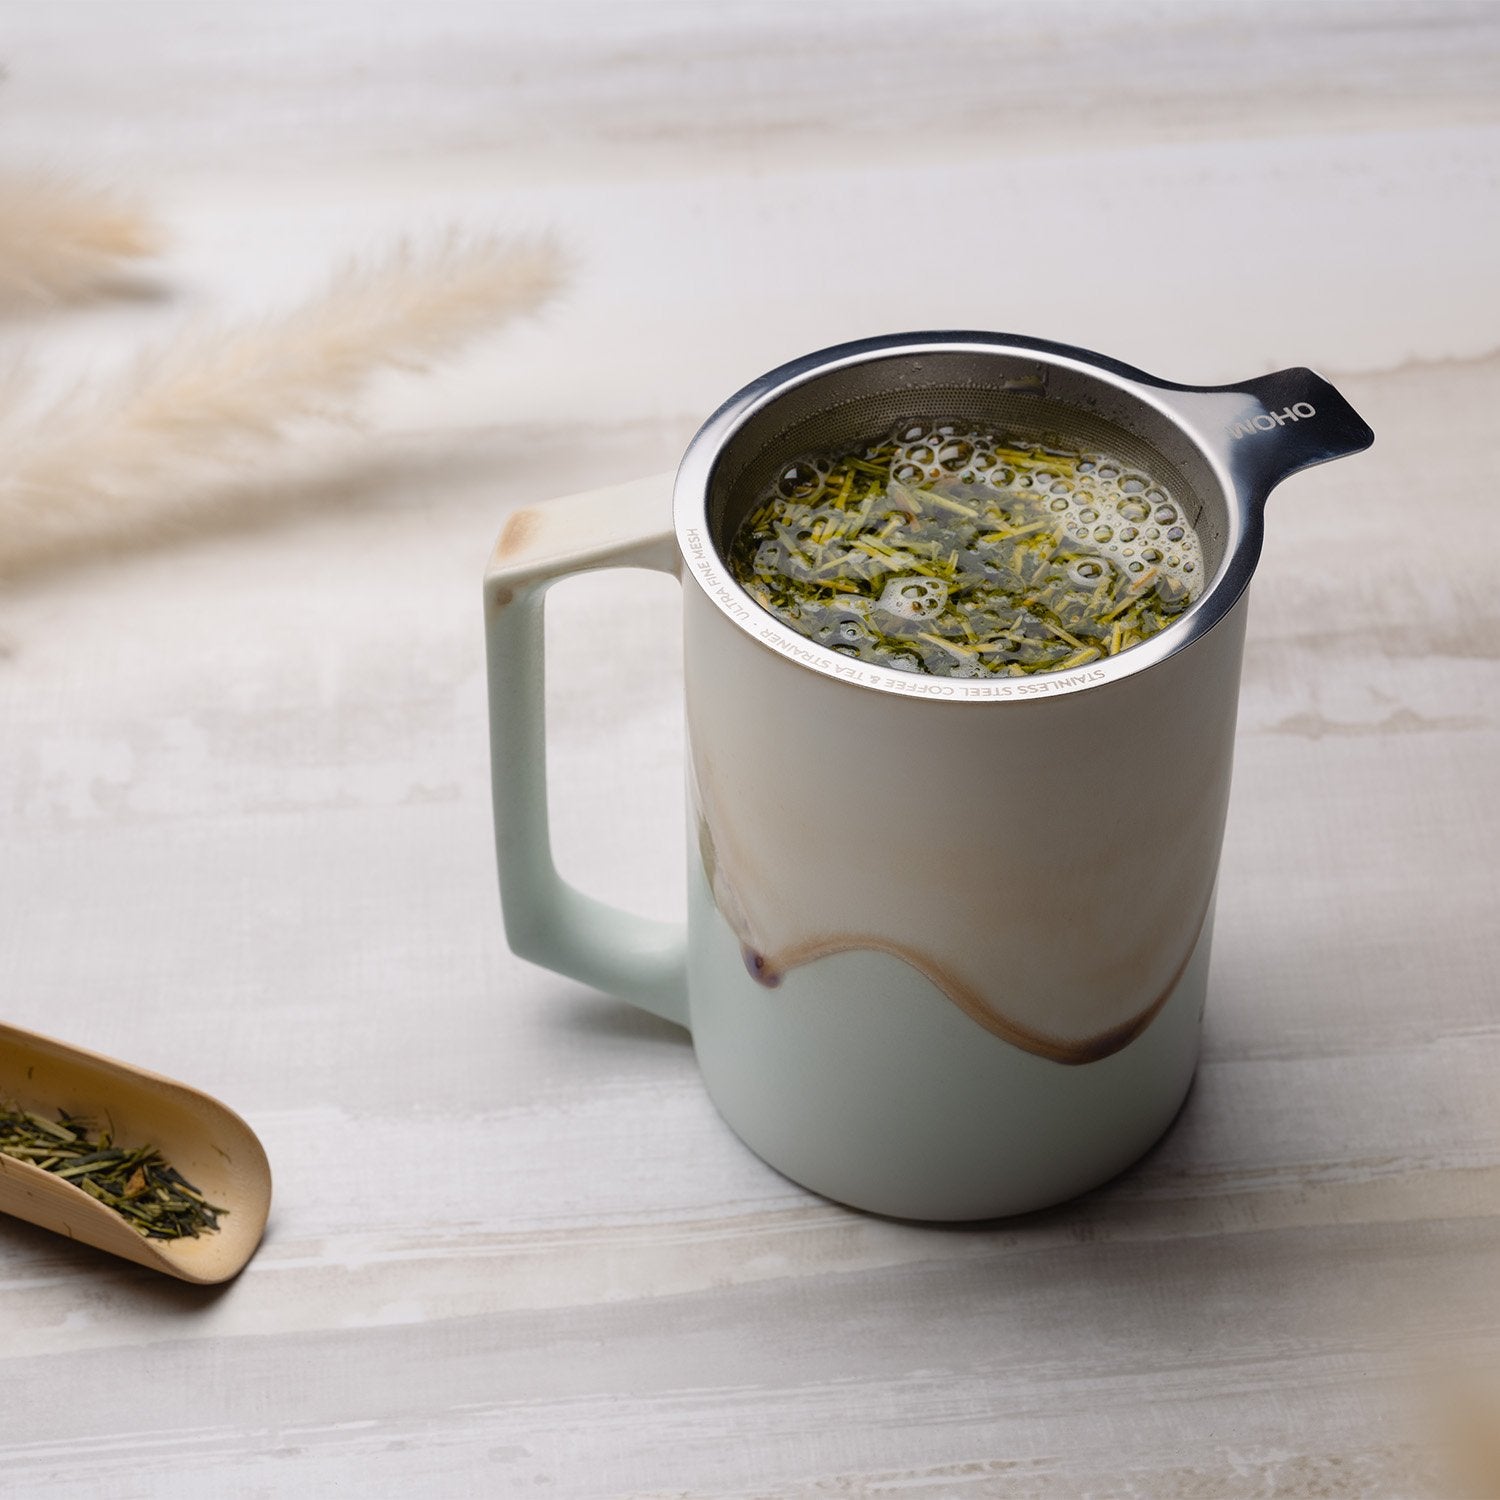 Large tea strainer with mint colored mug filled with hot water